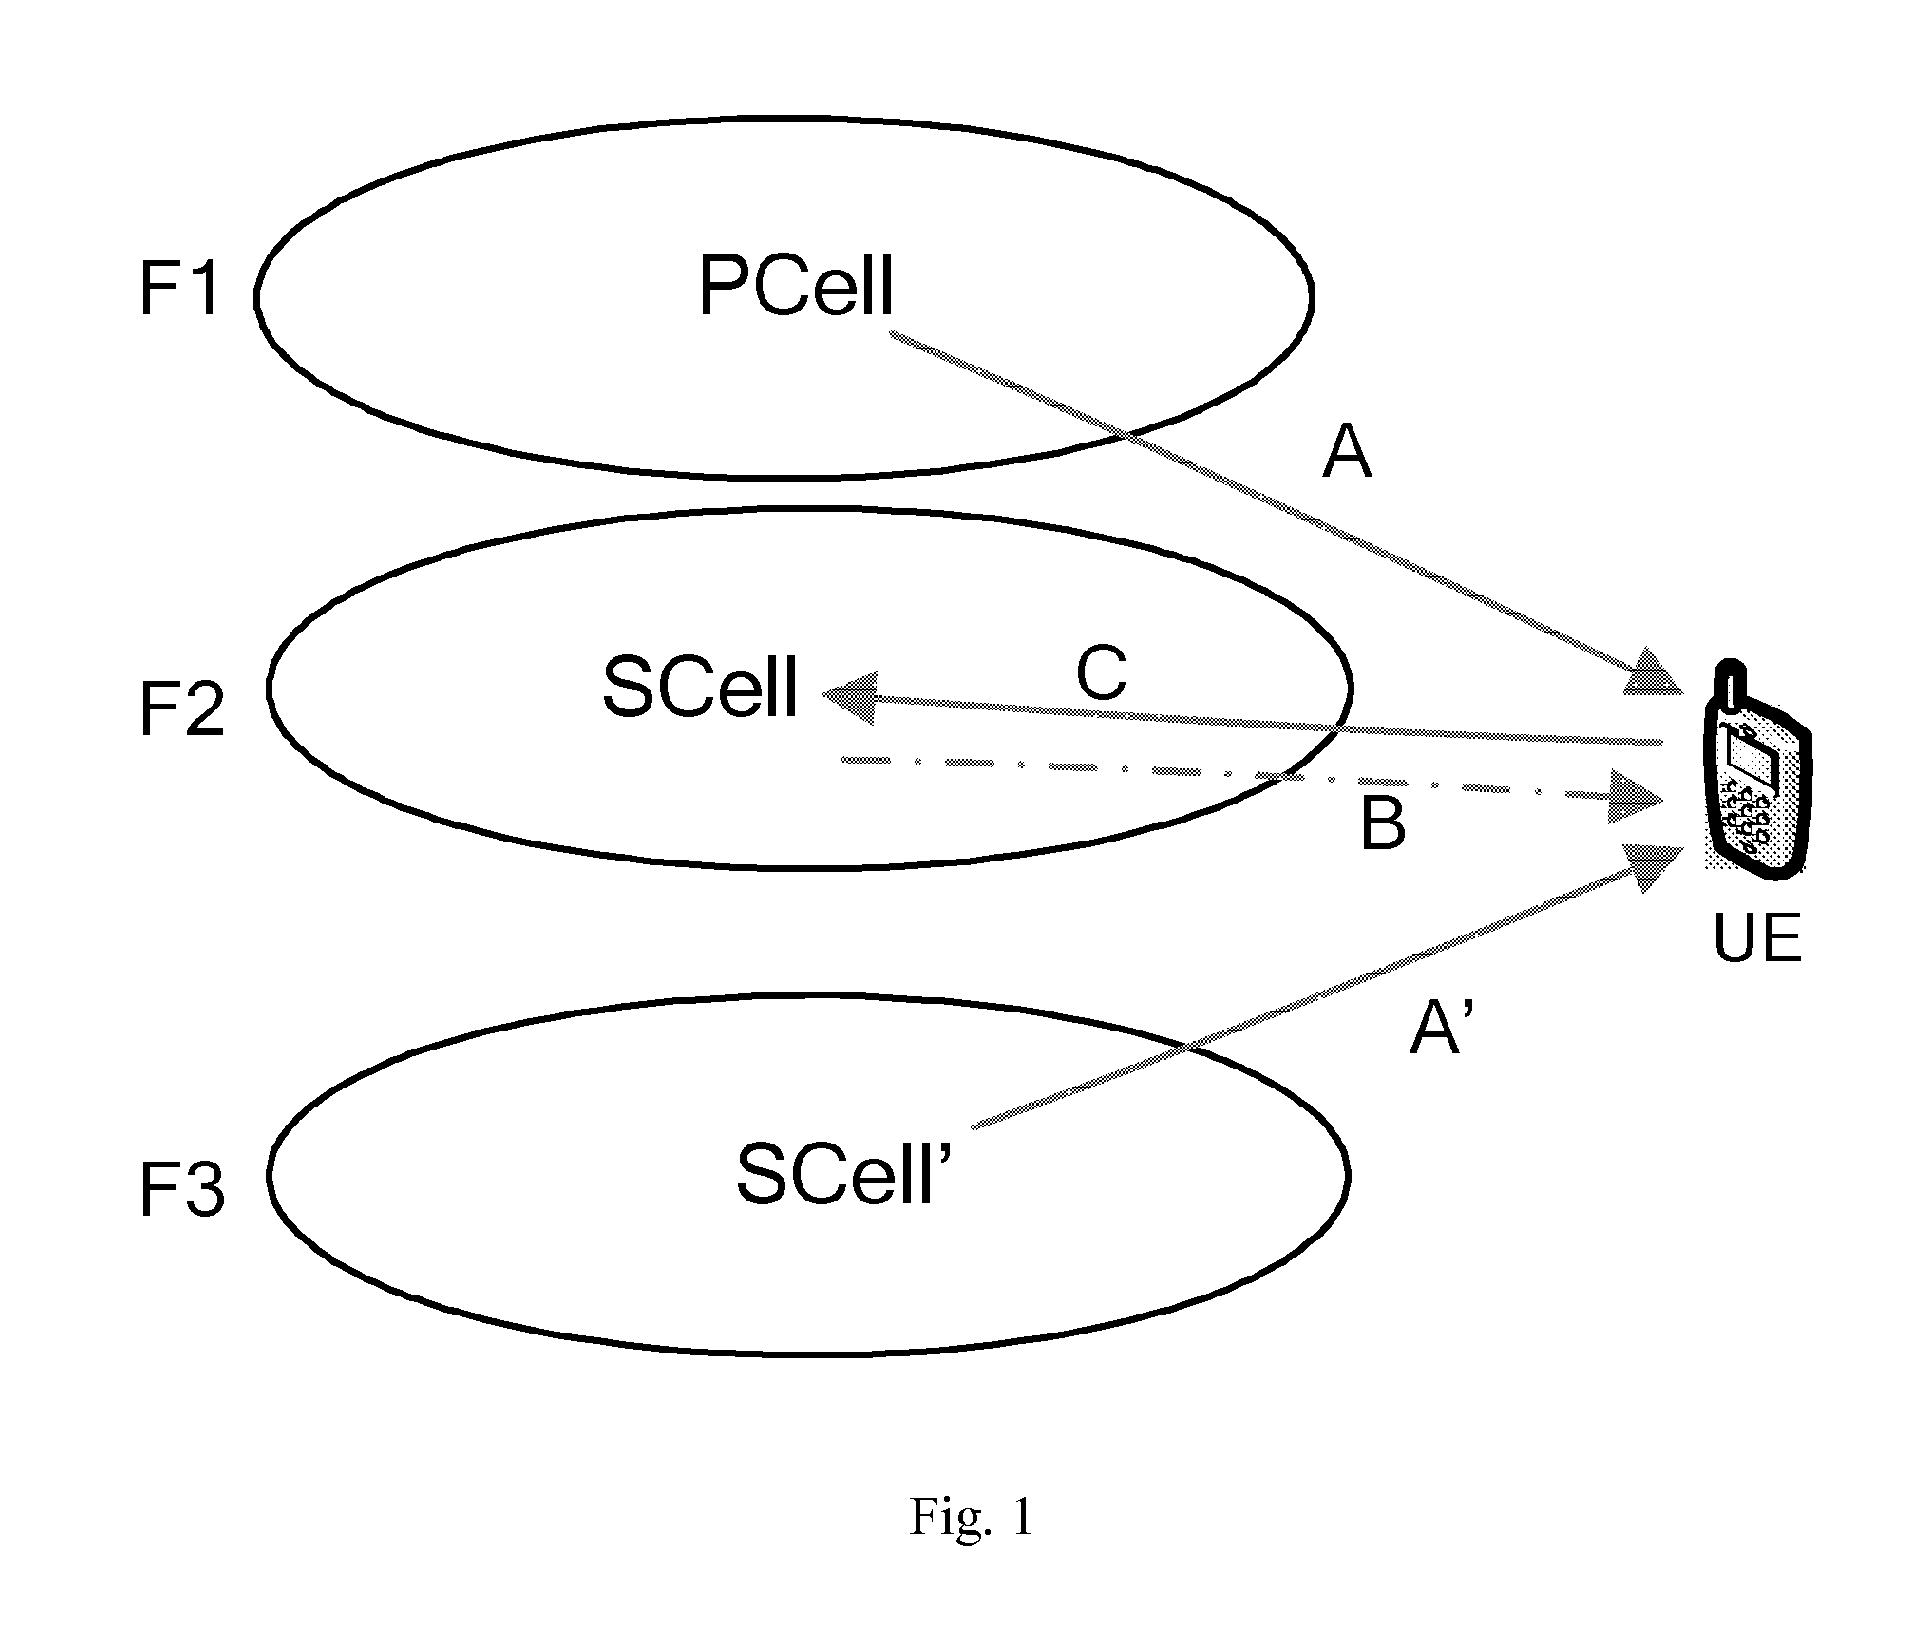 Method of randomly accessing a secondary cell and receiving data